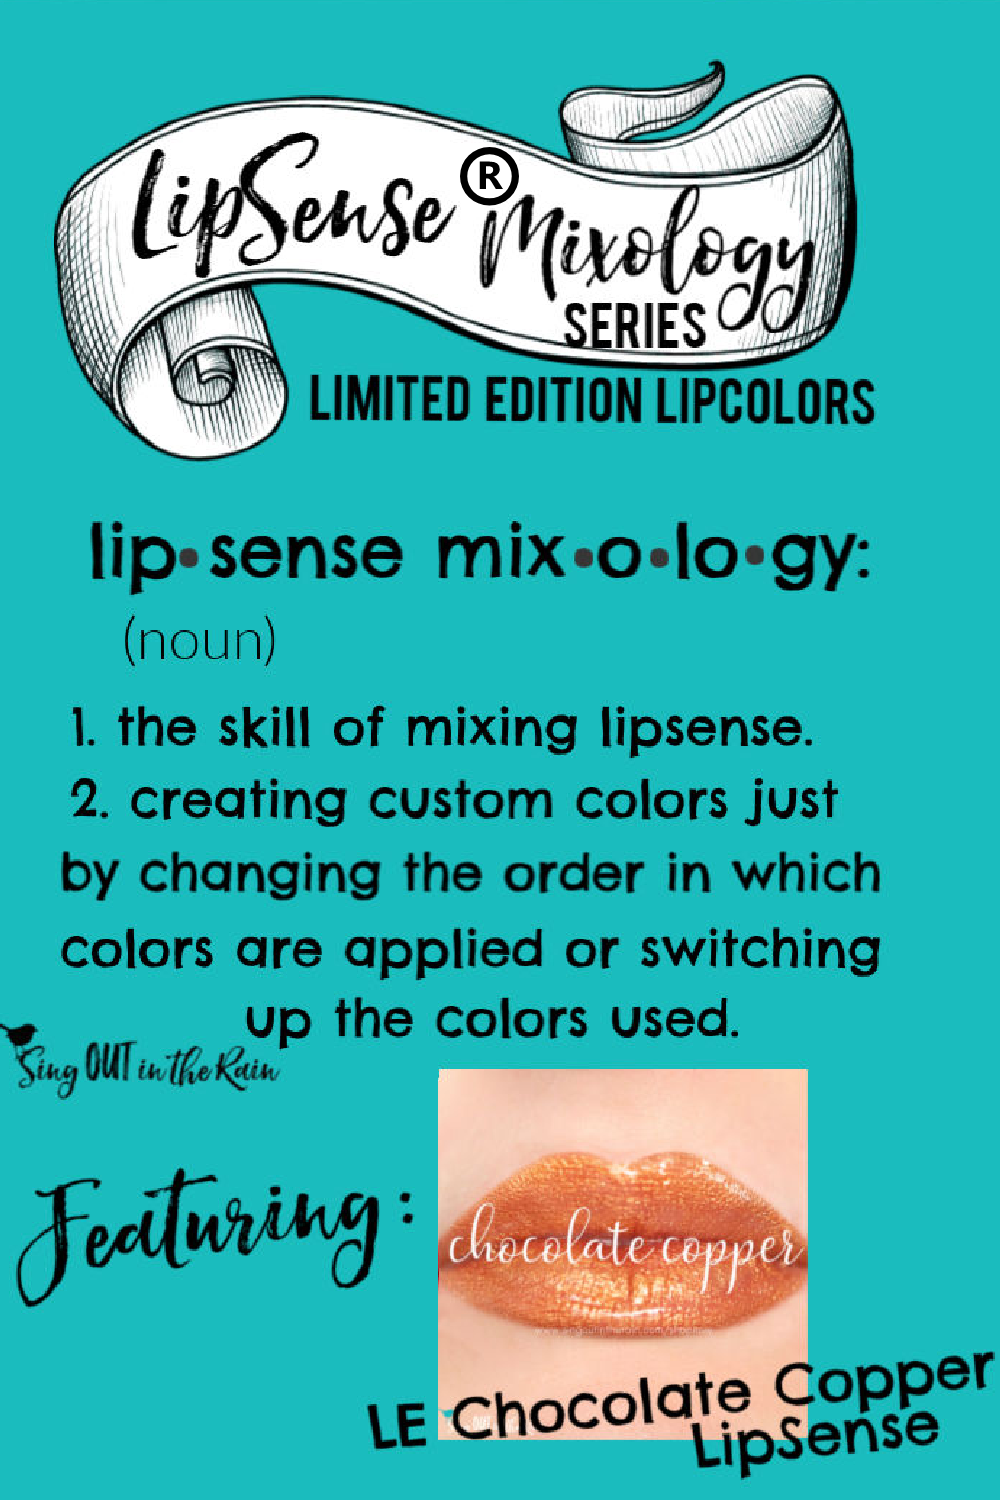 The Ultimate Guide to Chocolate Copper LipSense Mixology